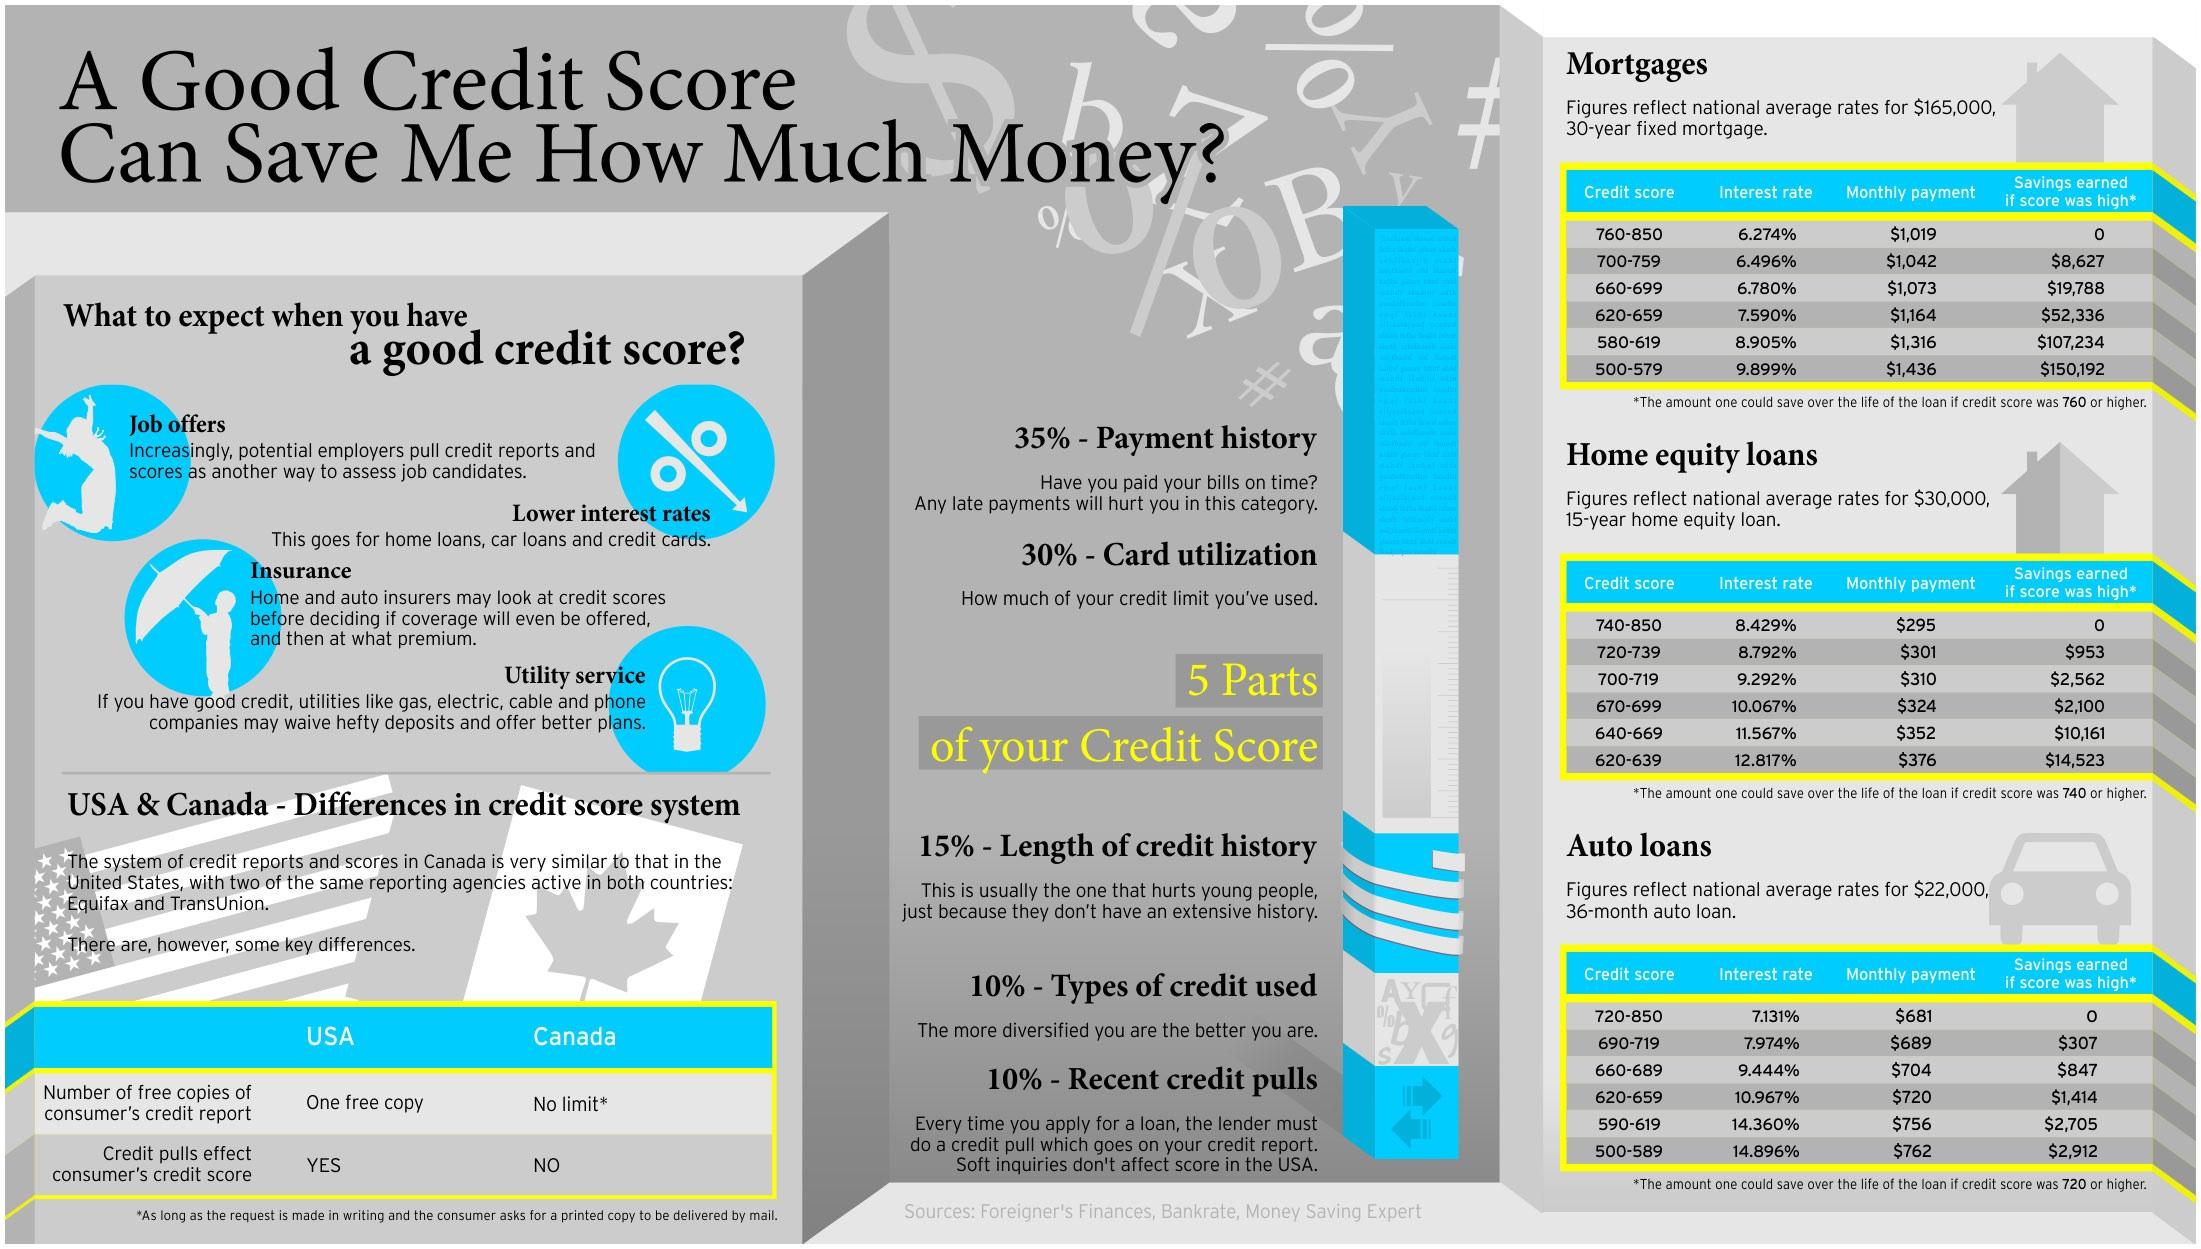 What is the Average Credit Score in Canada?